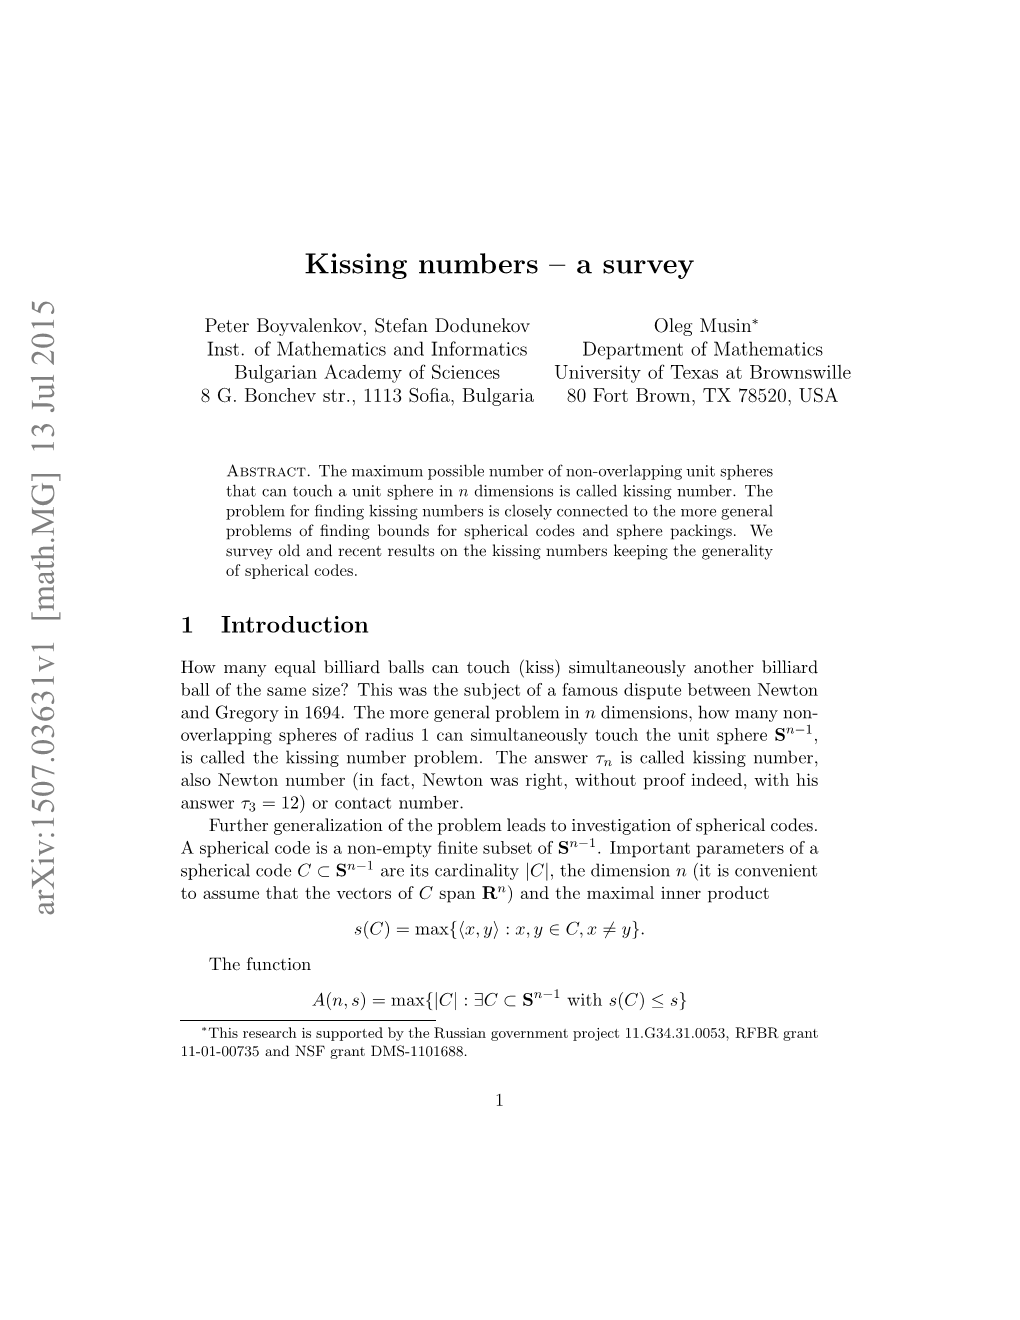 A Survey on the Kissing Numbers